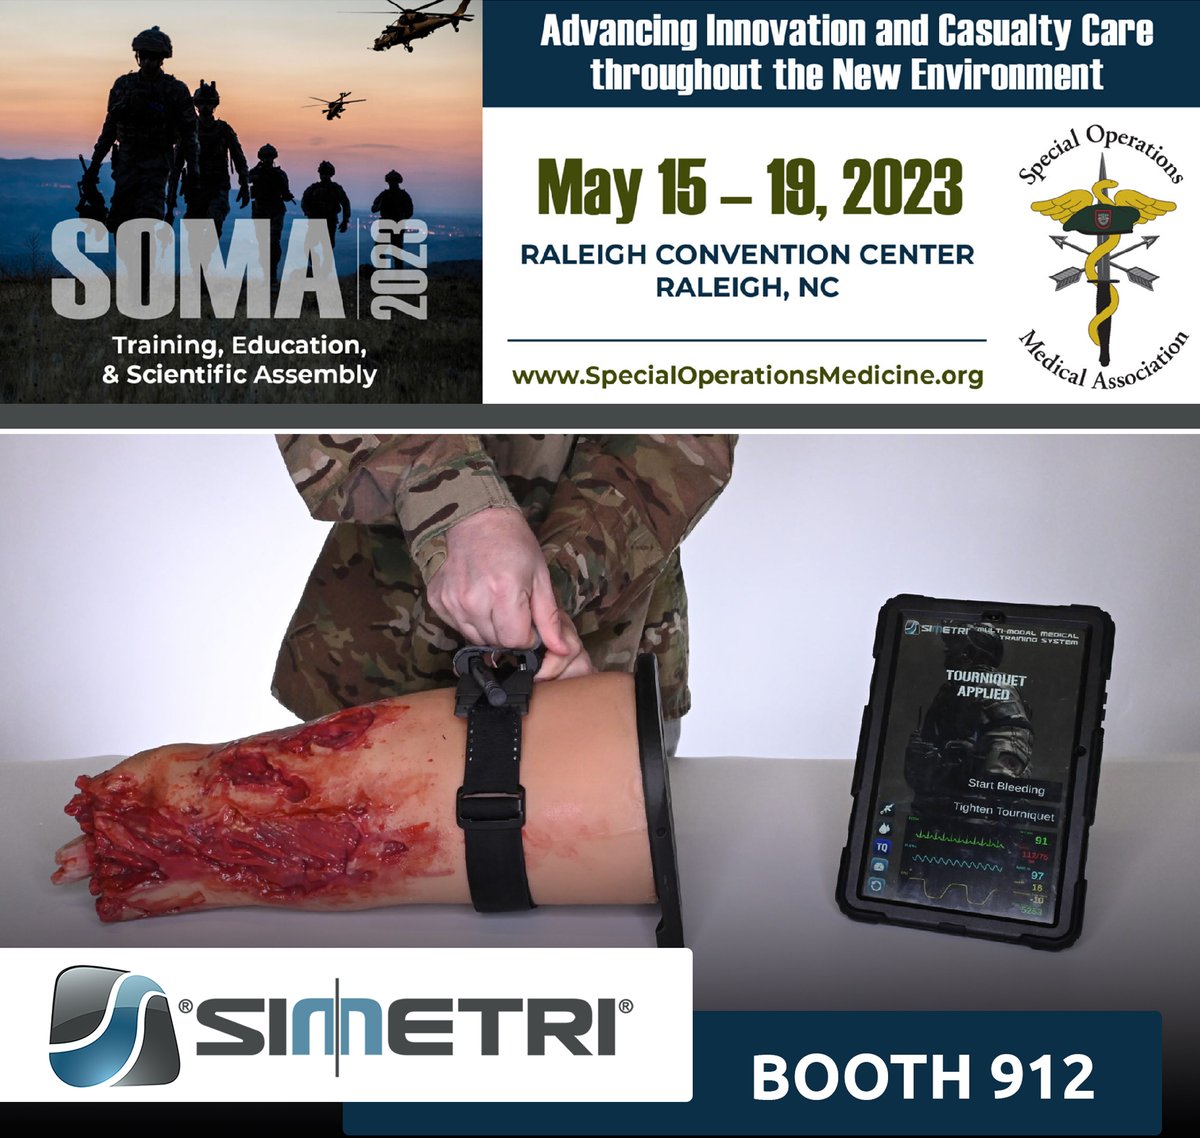 The future of #TourniquetTraining will be on display at #SOMA2023 Exhibit Hall BOOTH 912 on May 17 & 18.

#Tourniquet #M3TS #SmartTourniquet #SmartSurrogates #M3TS #CombatMedicine #ProlongedCasualtyCare #ProlongedFieldCare